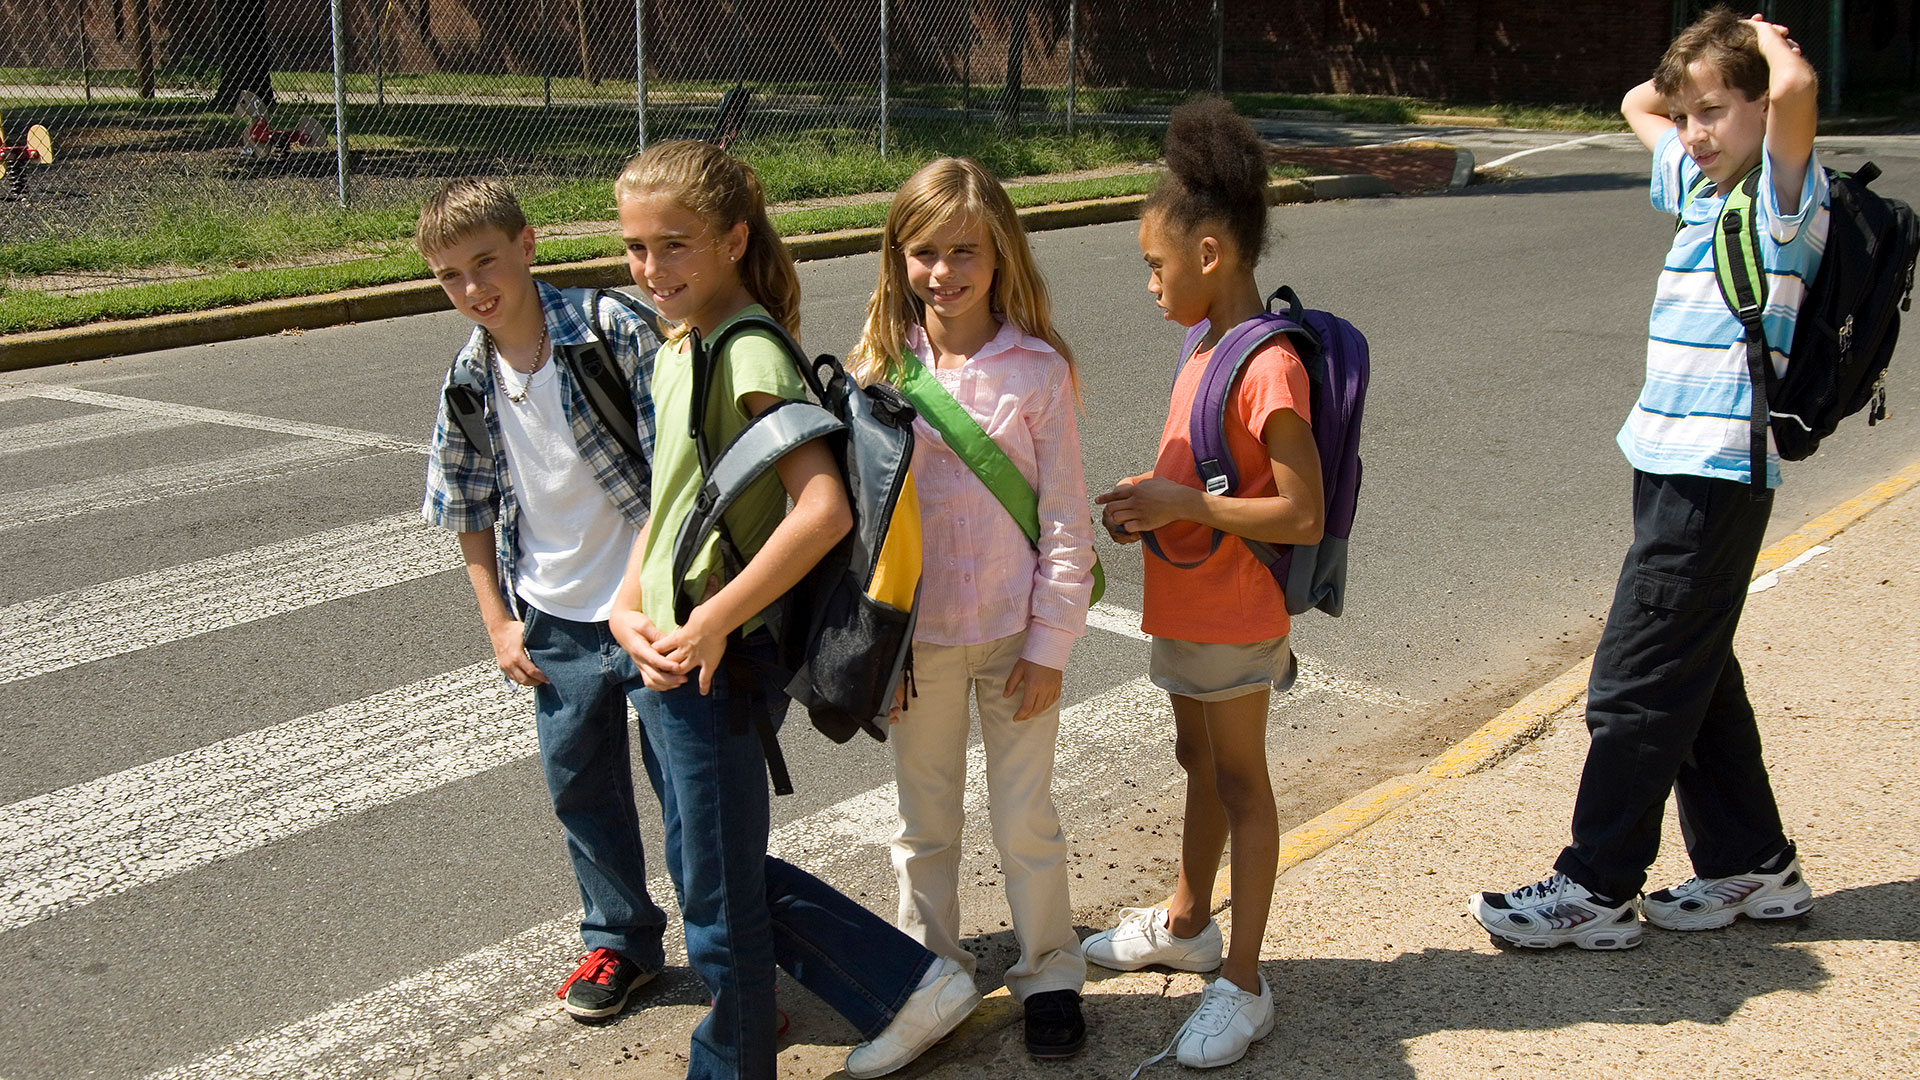 Group of children with backpacks waiting to cross the street